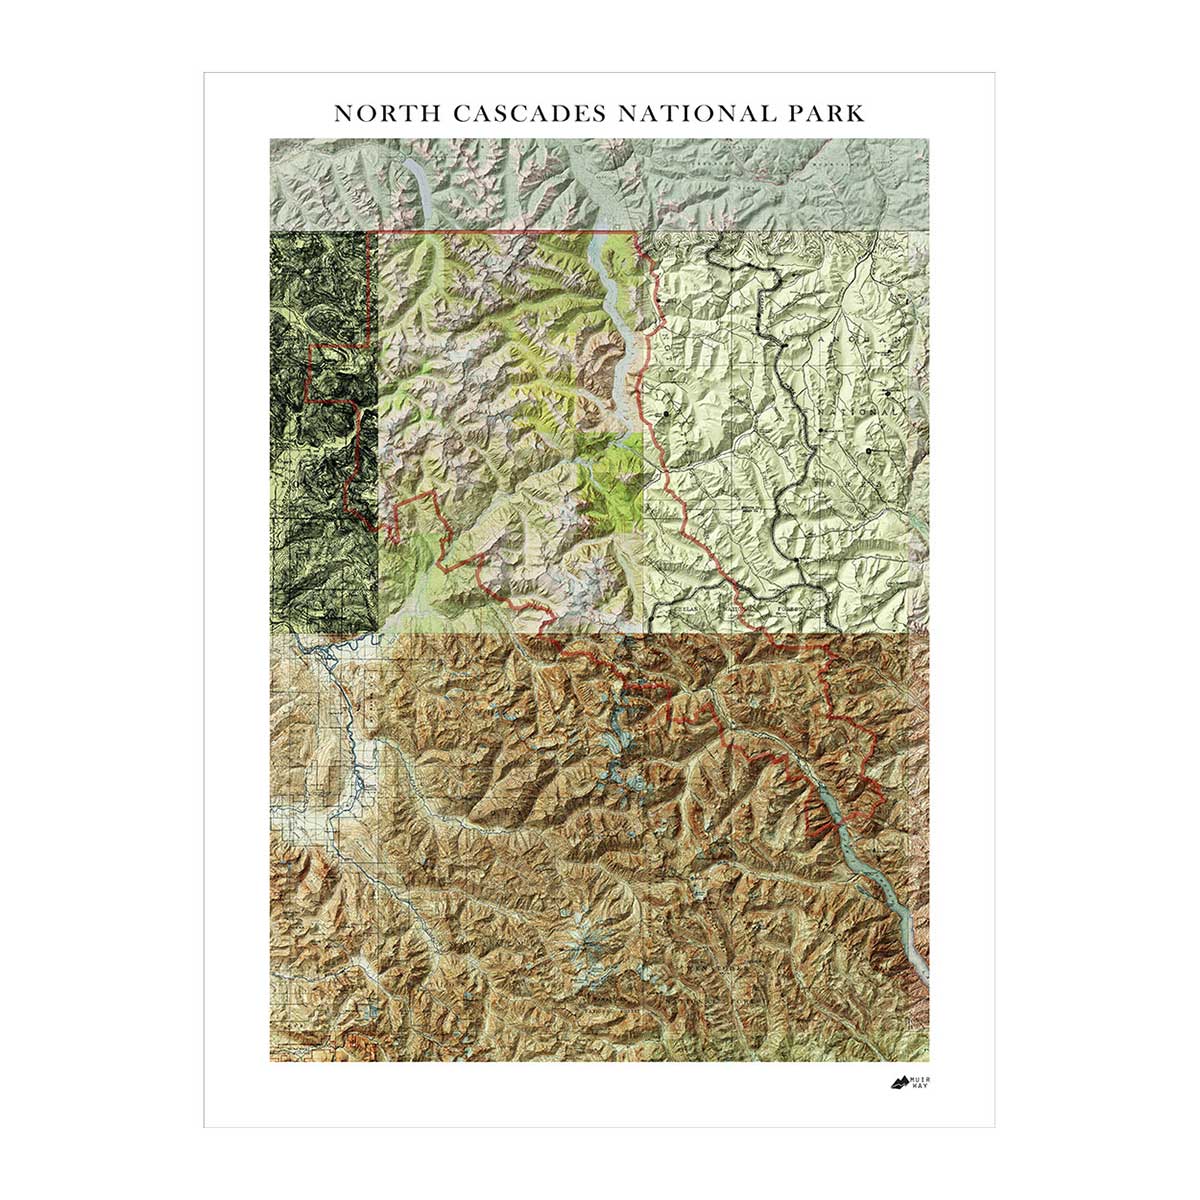 Relief Map of North Cascades National Park